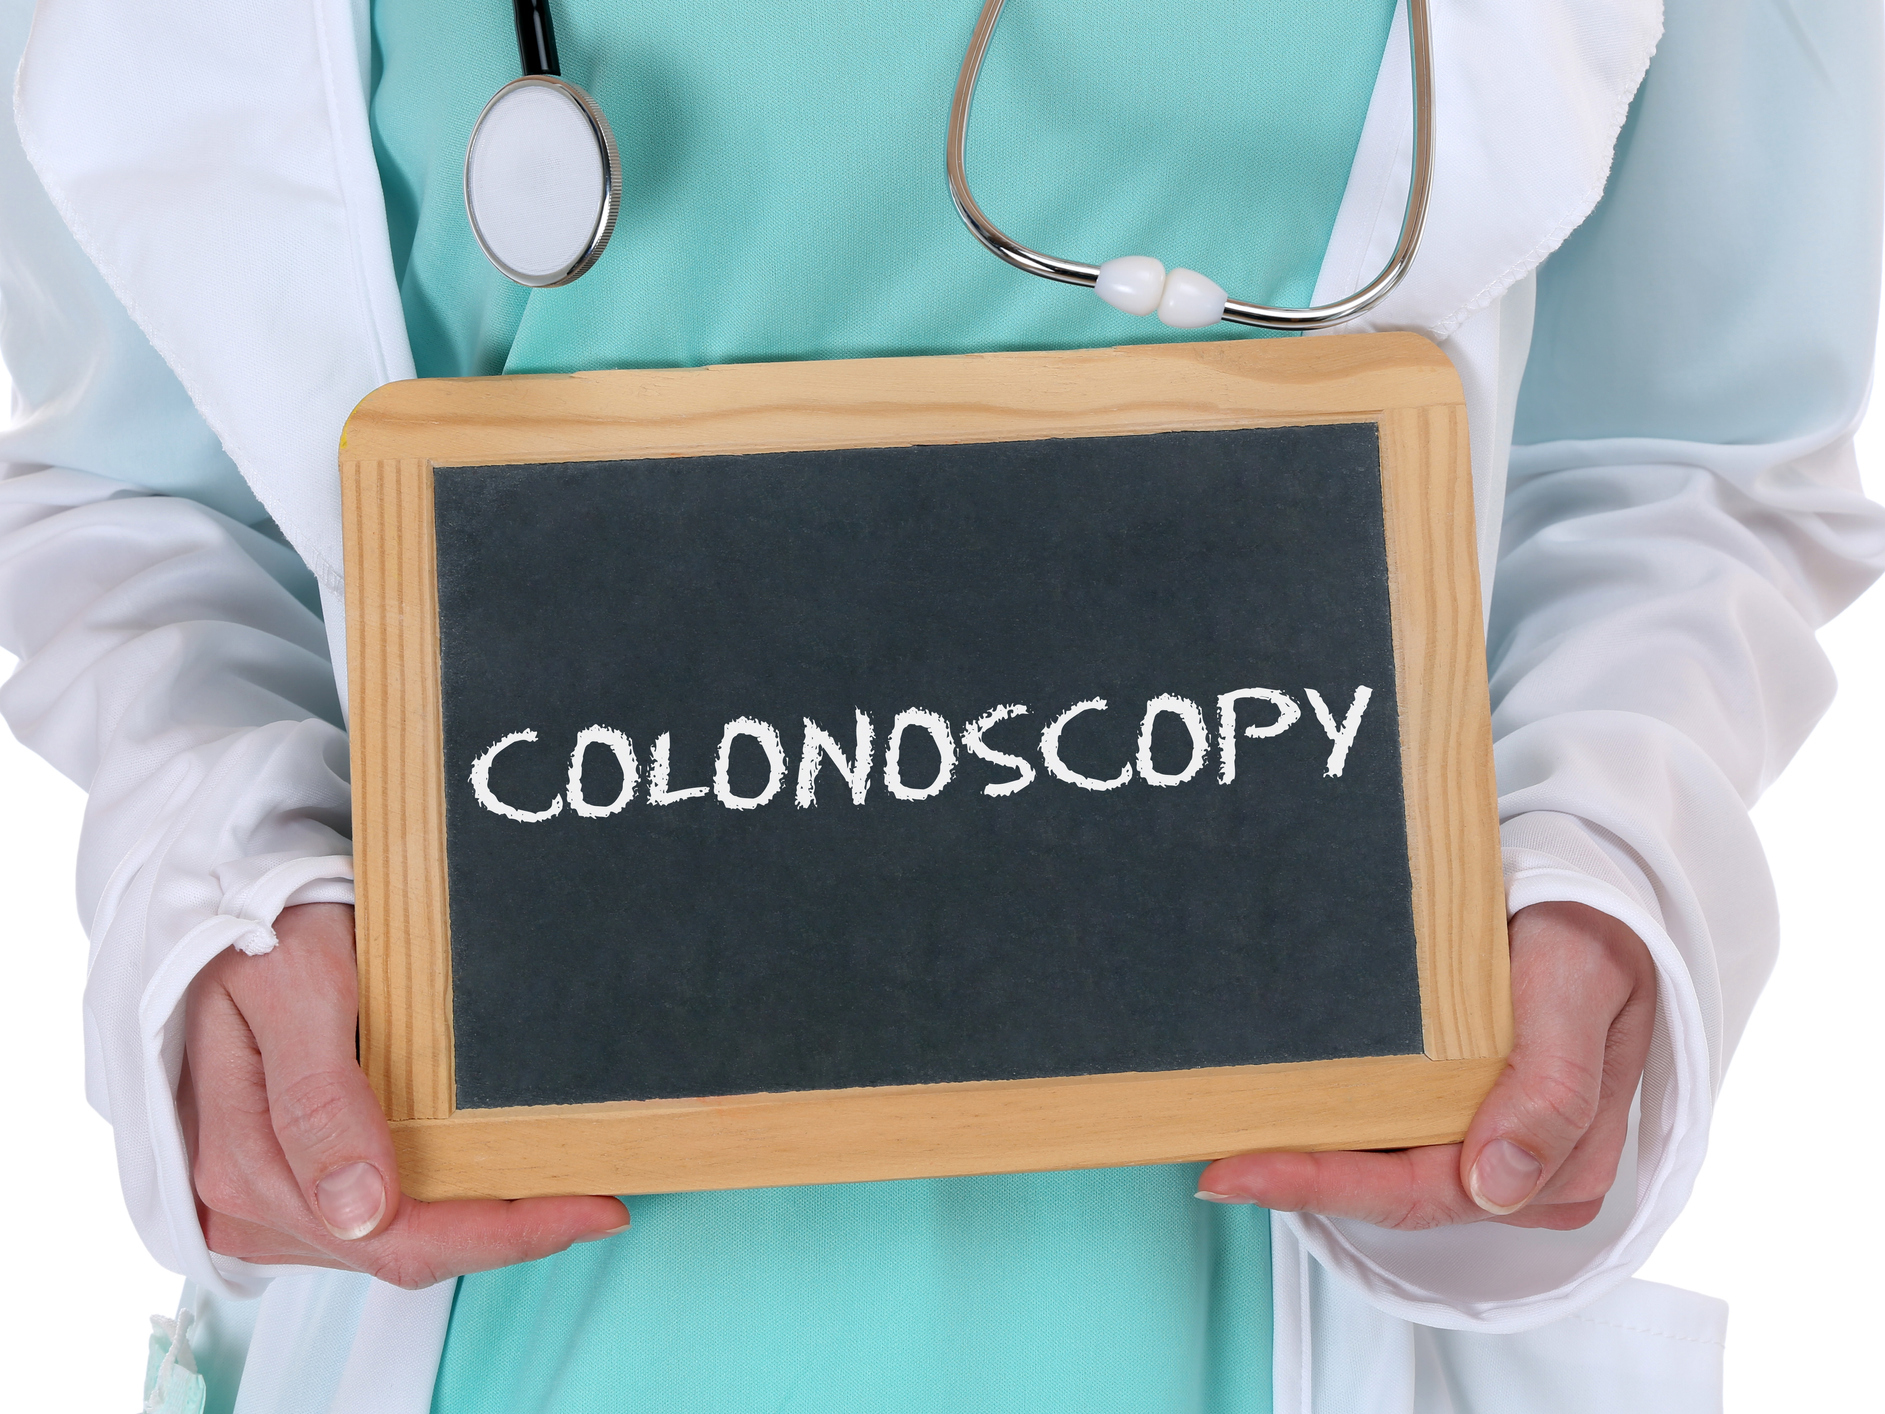 What to know about colonoscopies and cancer risk